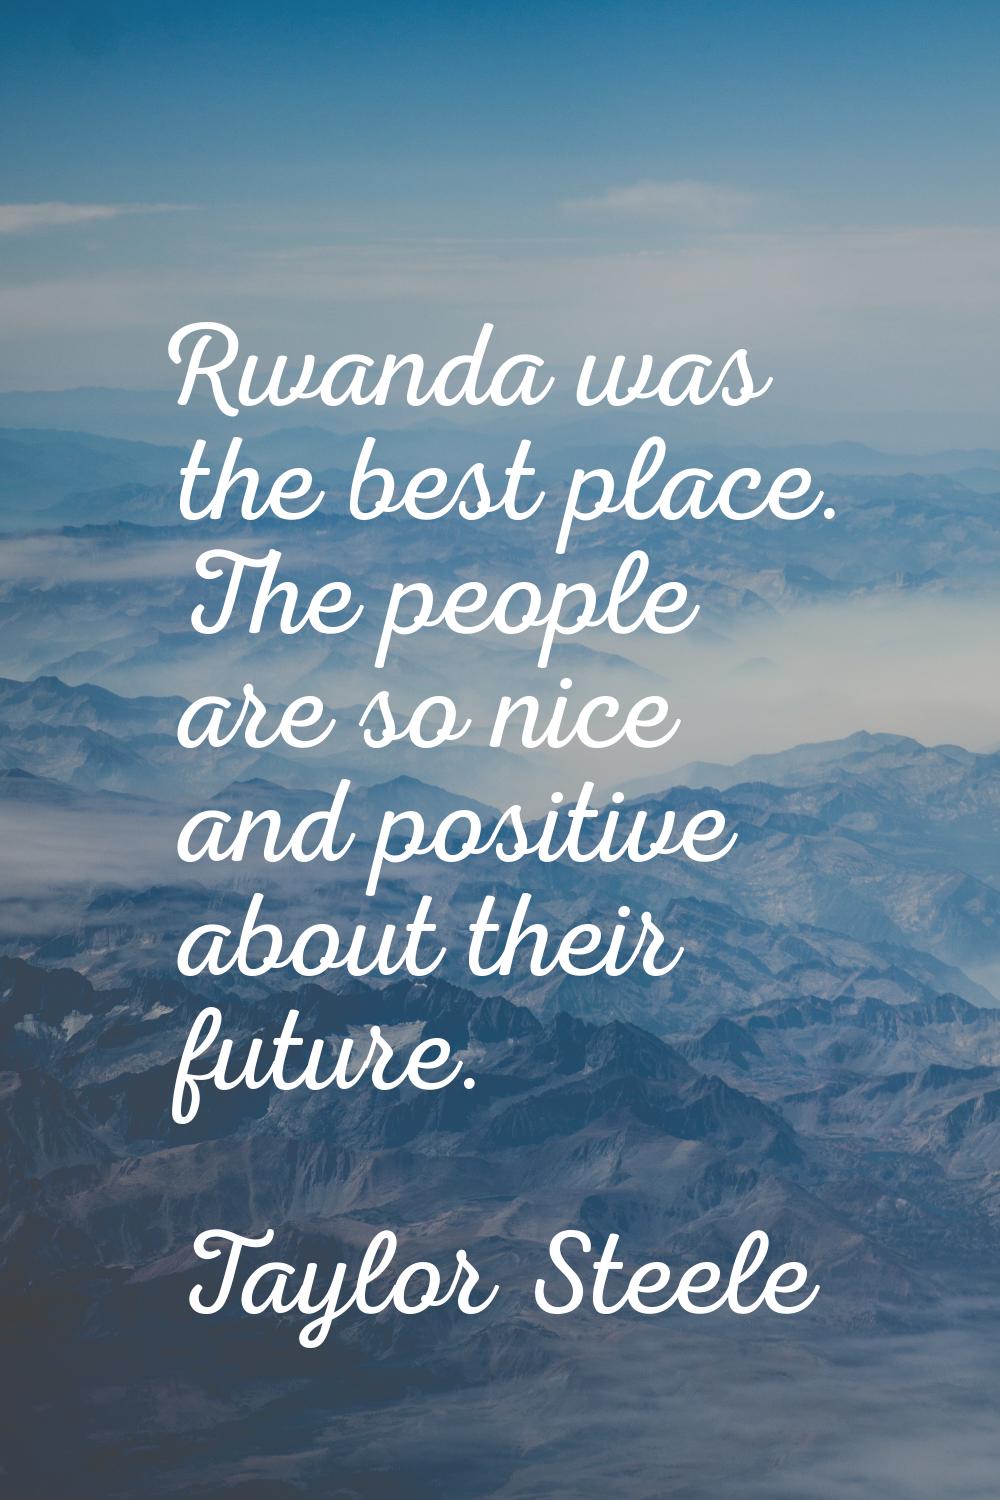 Rwanda was the best place. The people are so nice and positive about their future.